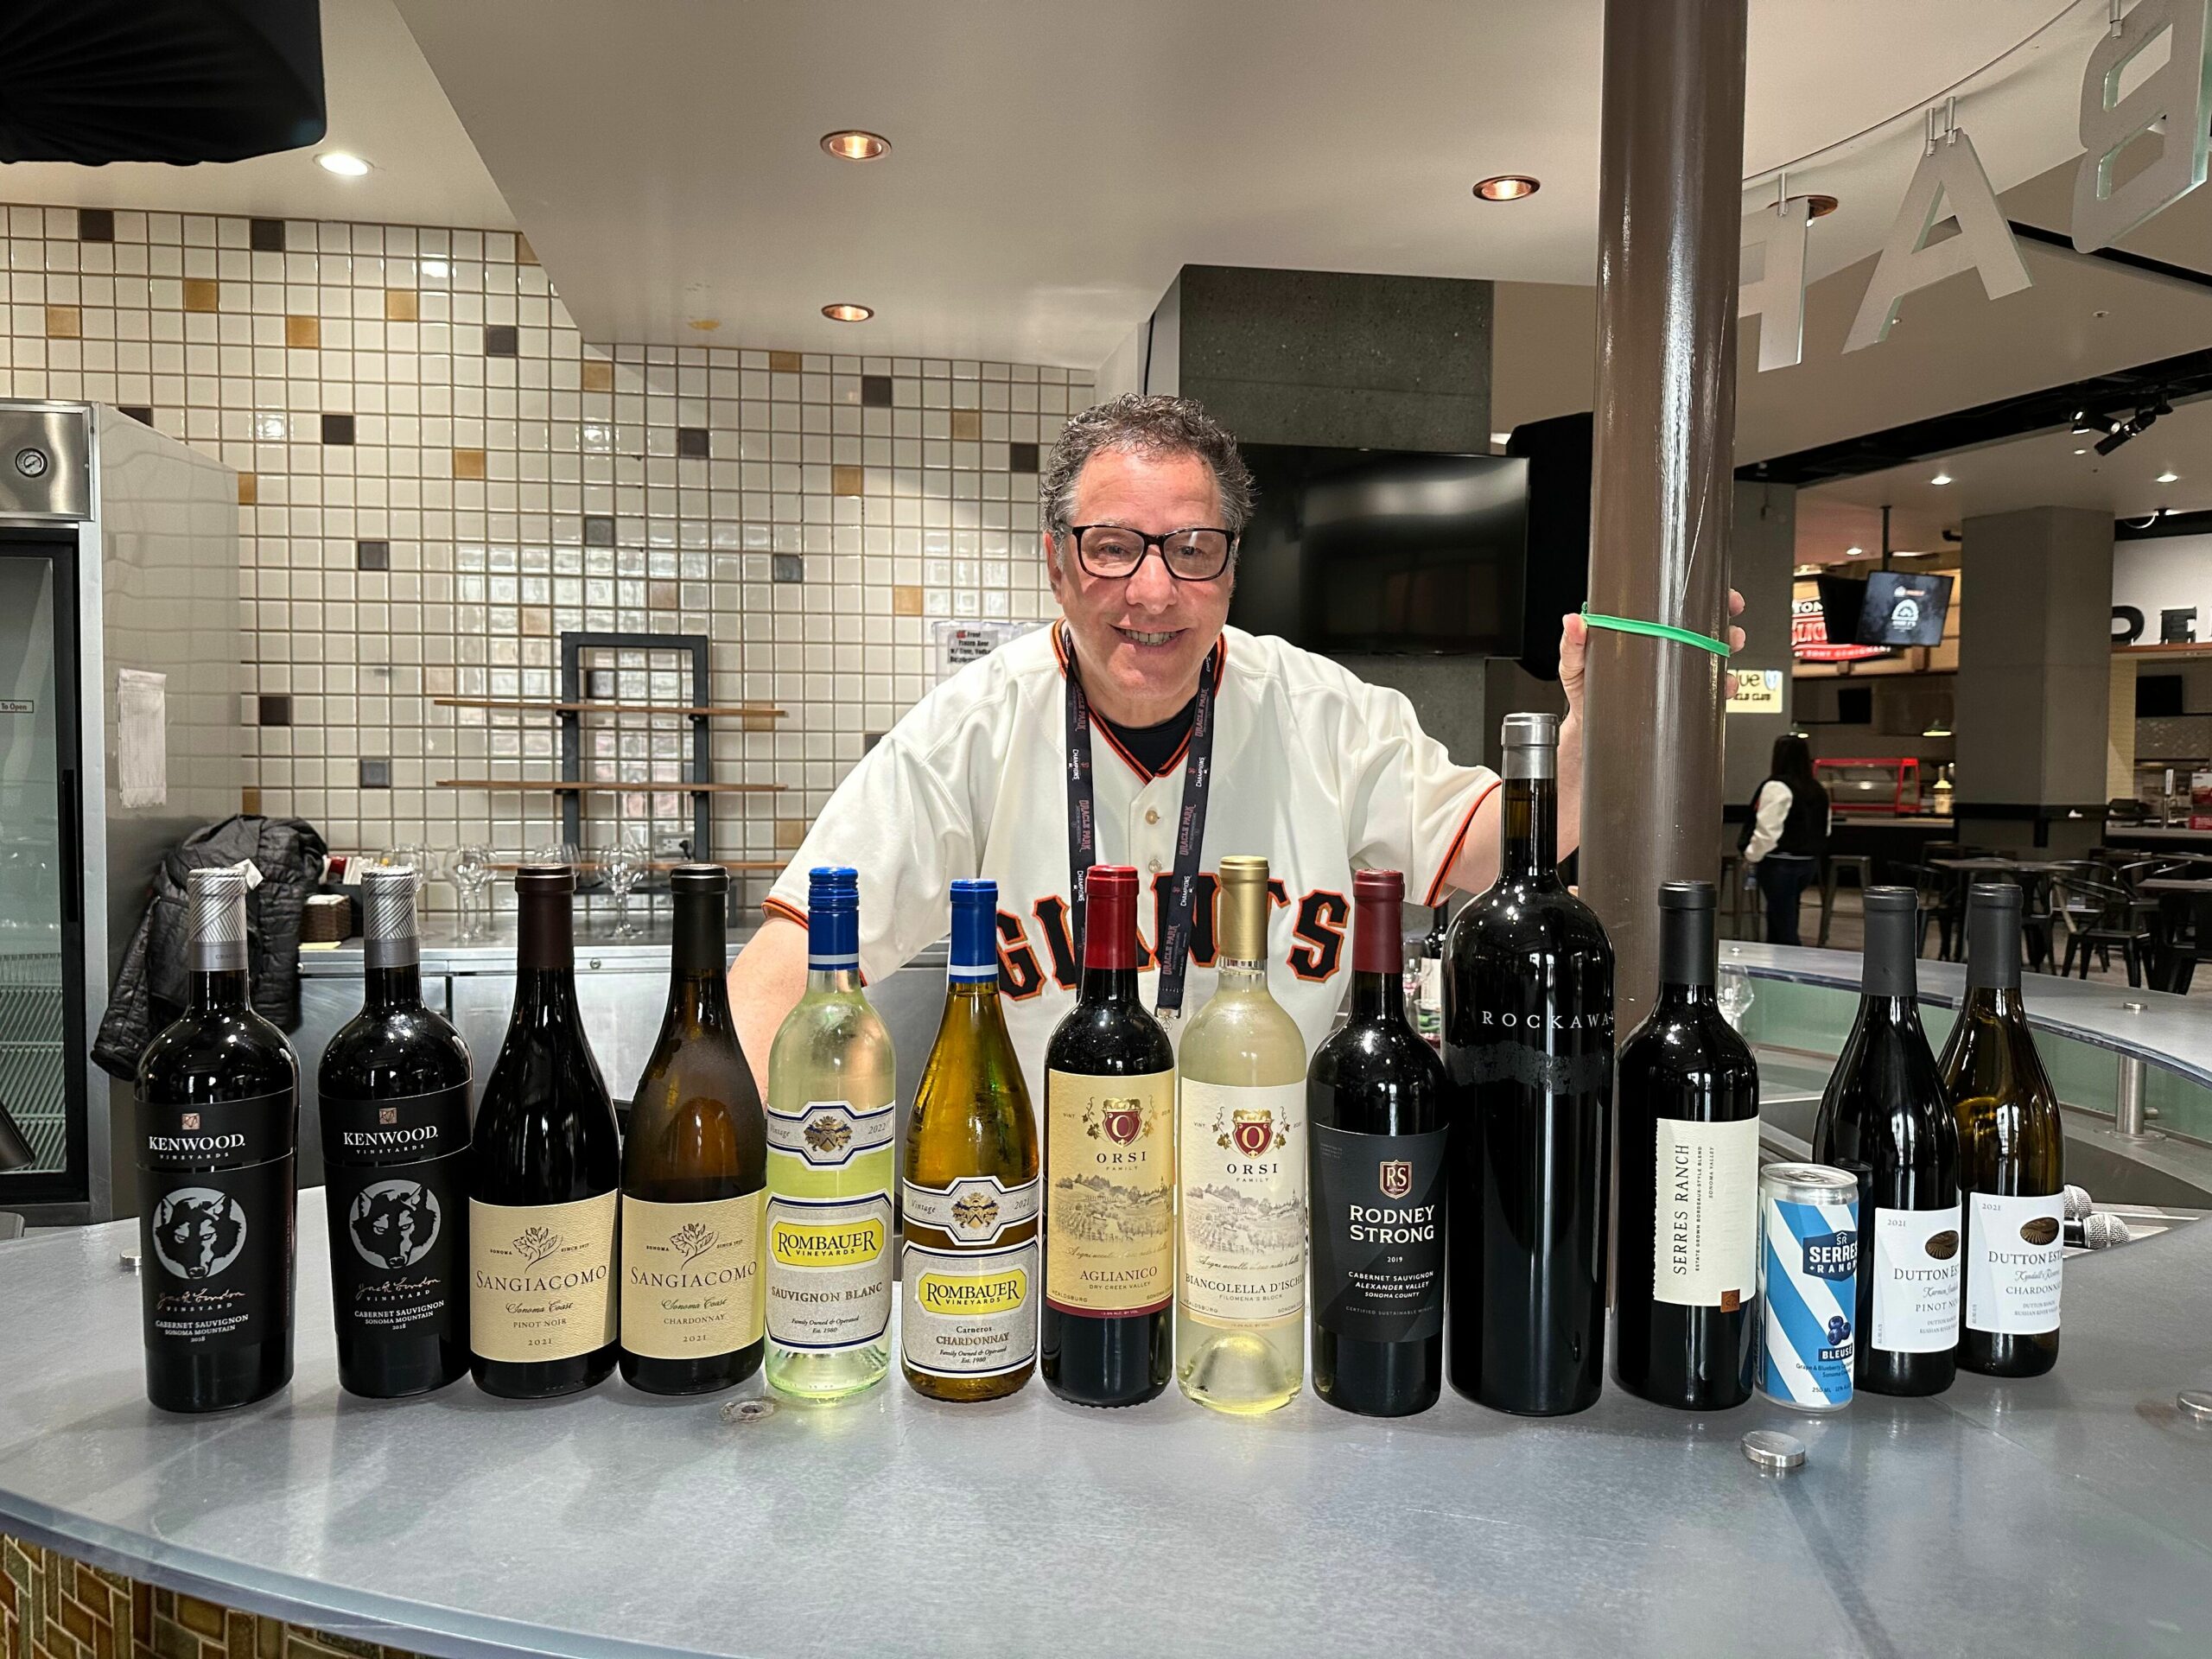 Man standing behind a bar, with 13 bottles of wine in front of him